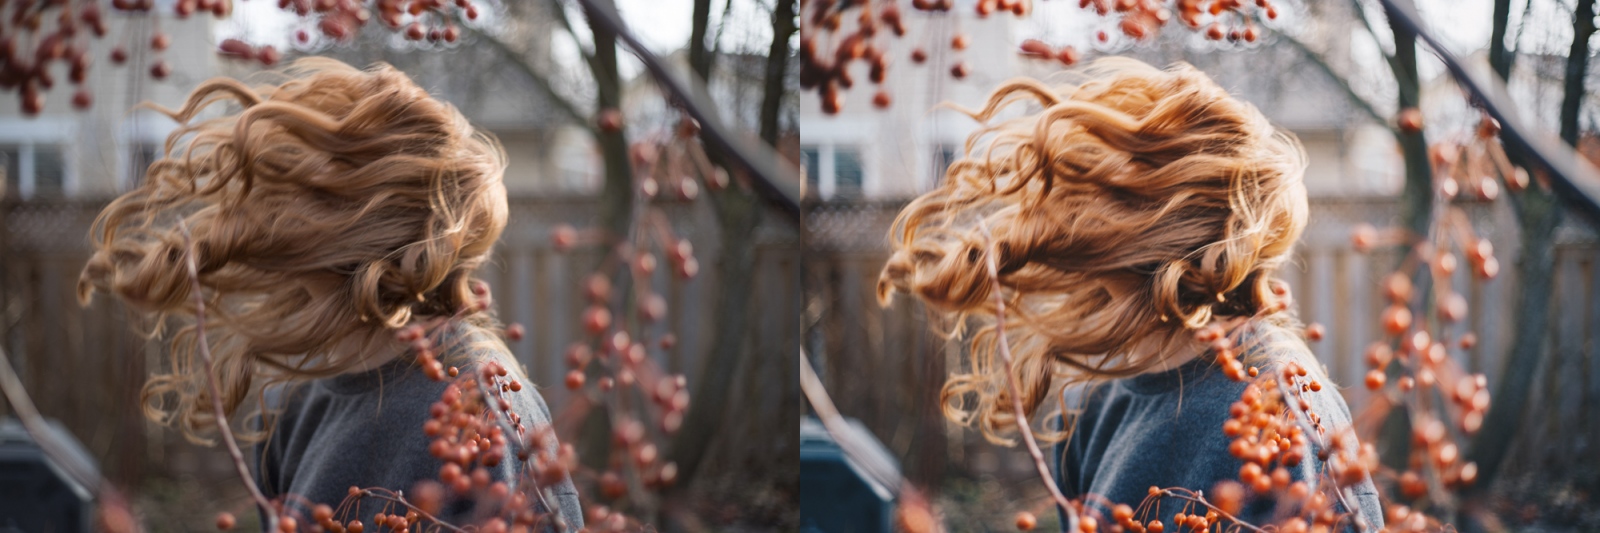 3 Free Lightroom Presets for Photographers